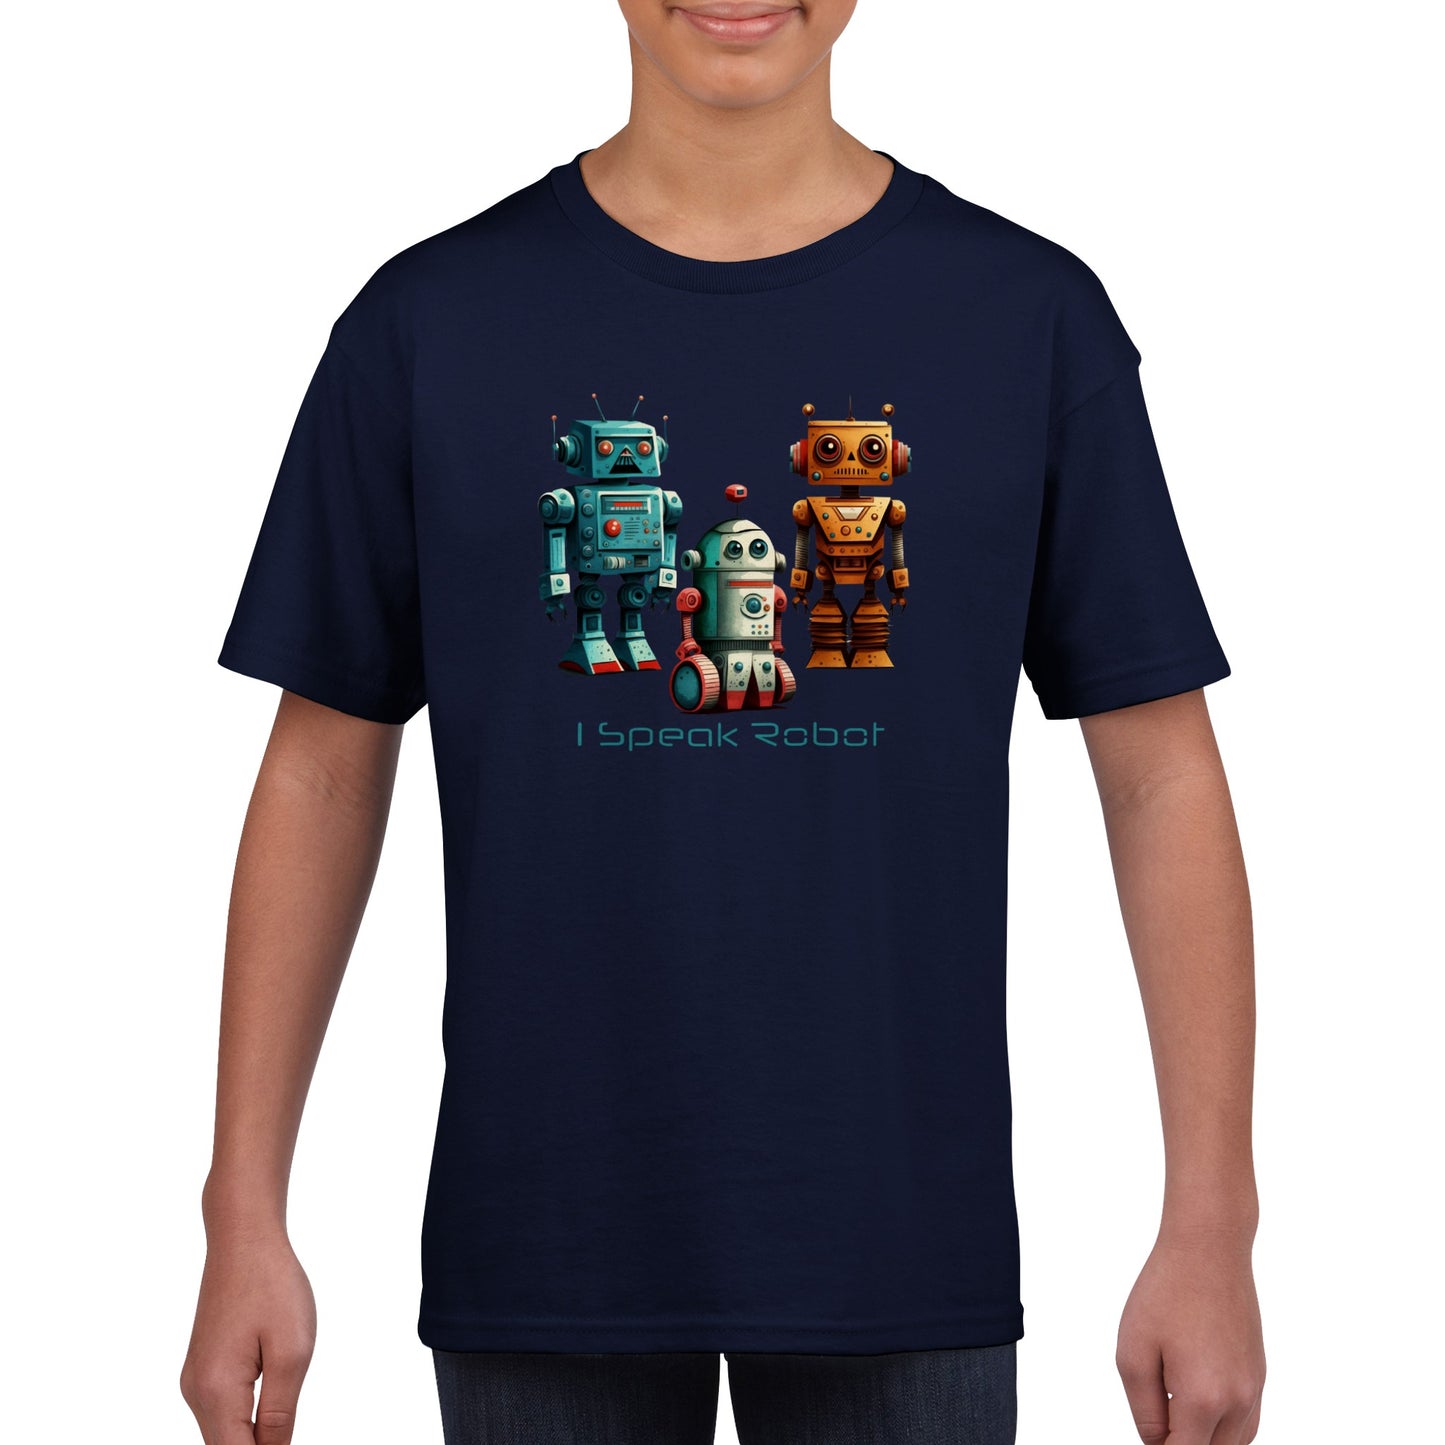 Boy wearing Navy Blue t-shirt with 3 robots and the caption I speak robot